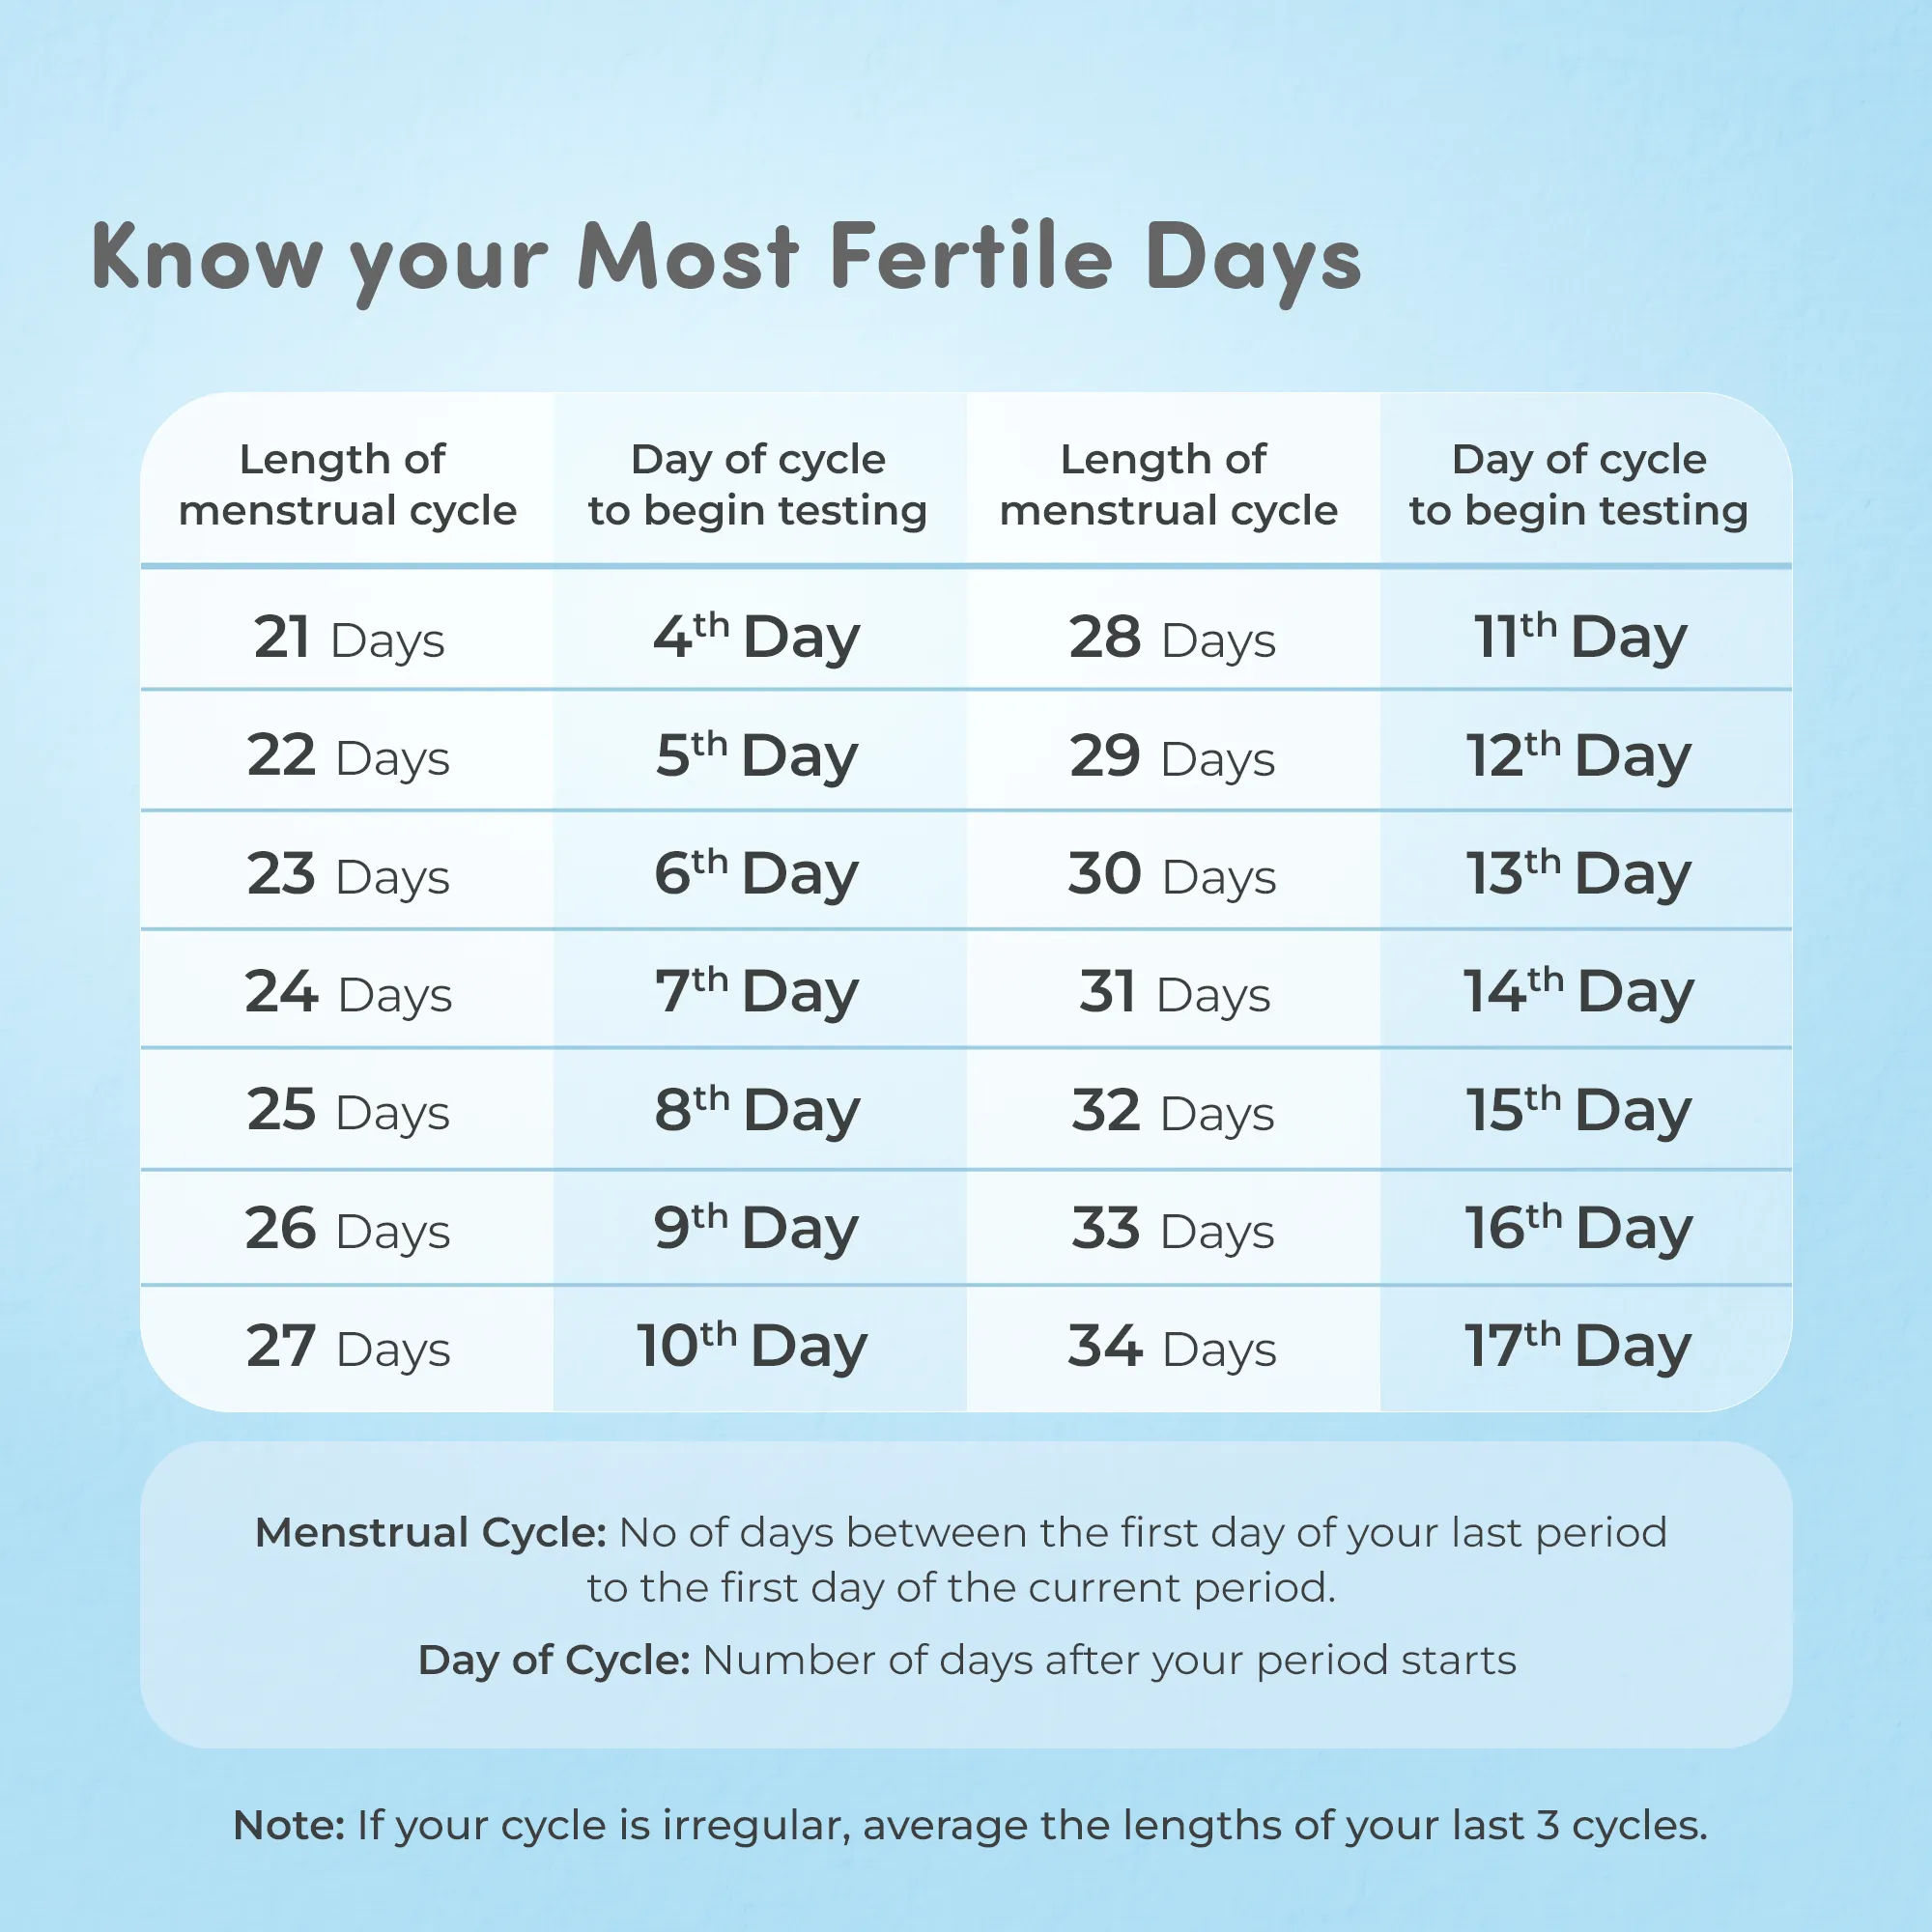 Ovulation Calculator: How to Calculate Your Most Fertile Days